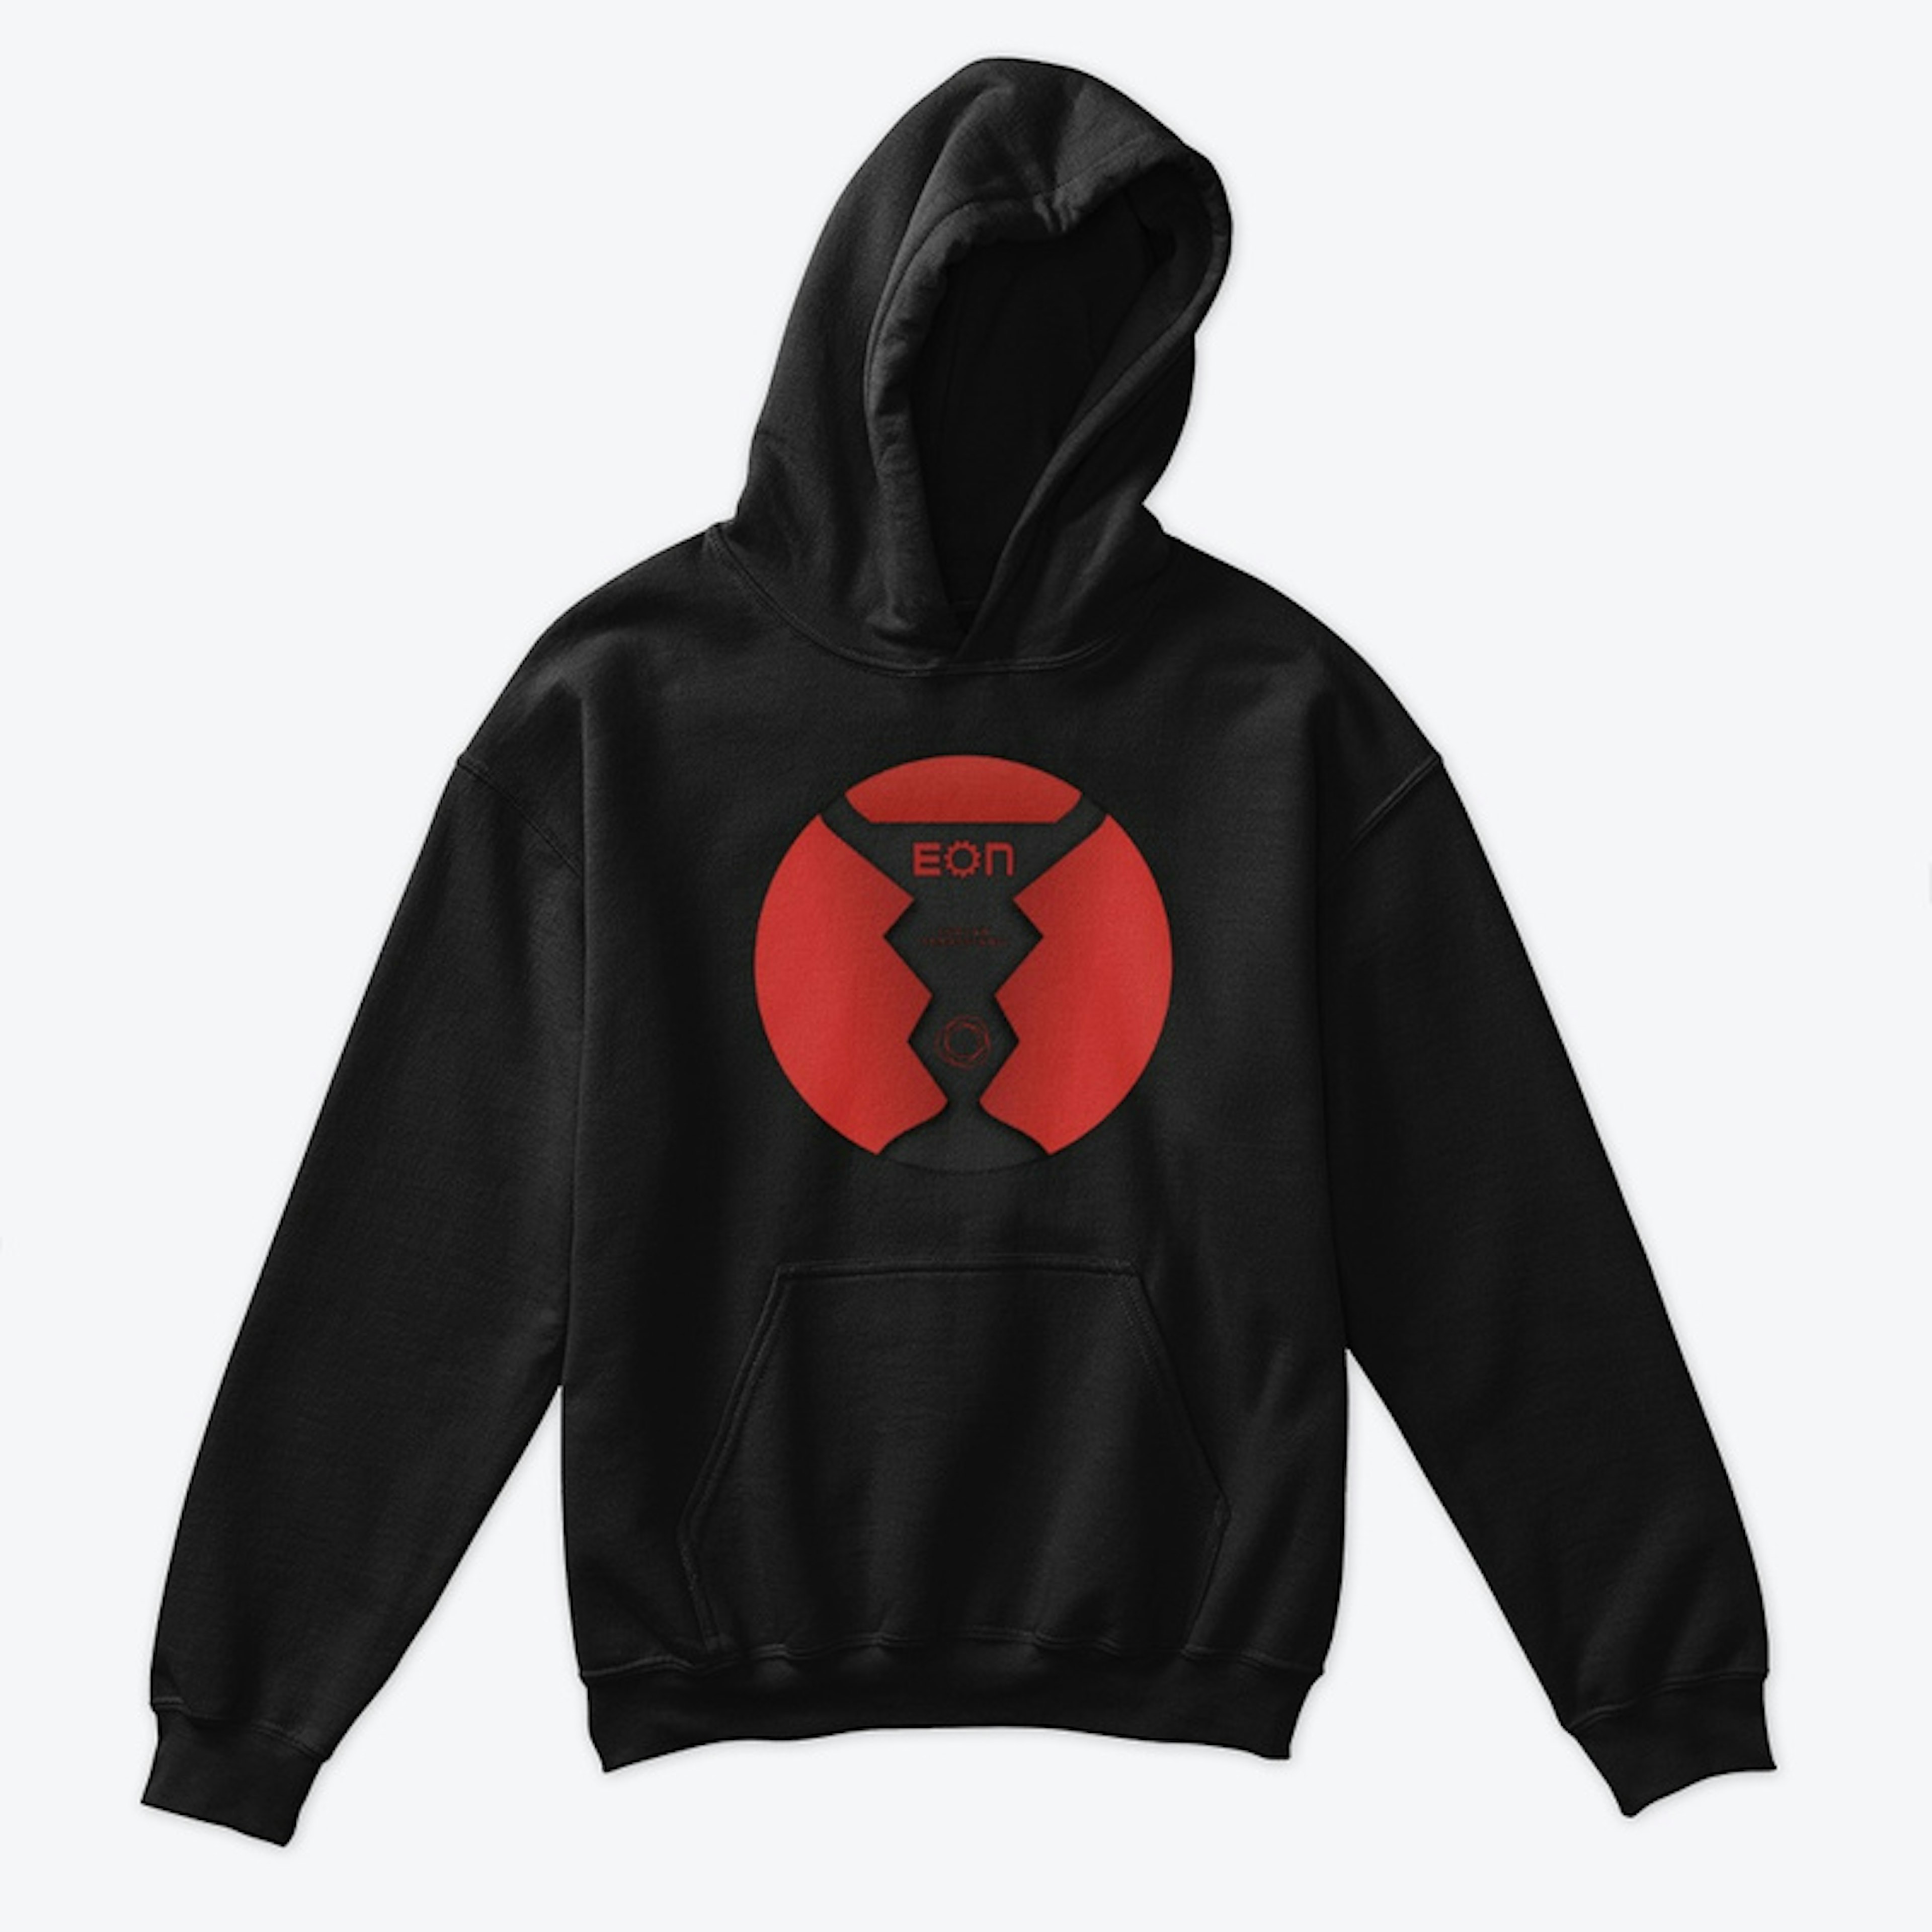 Young Eon hoodie